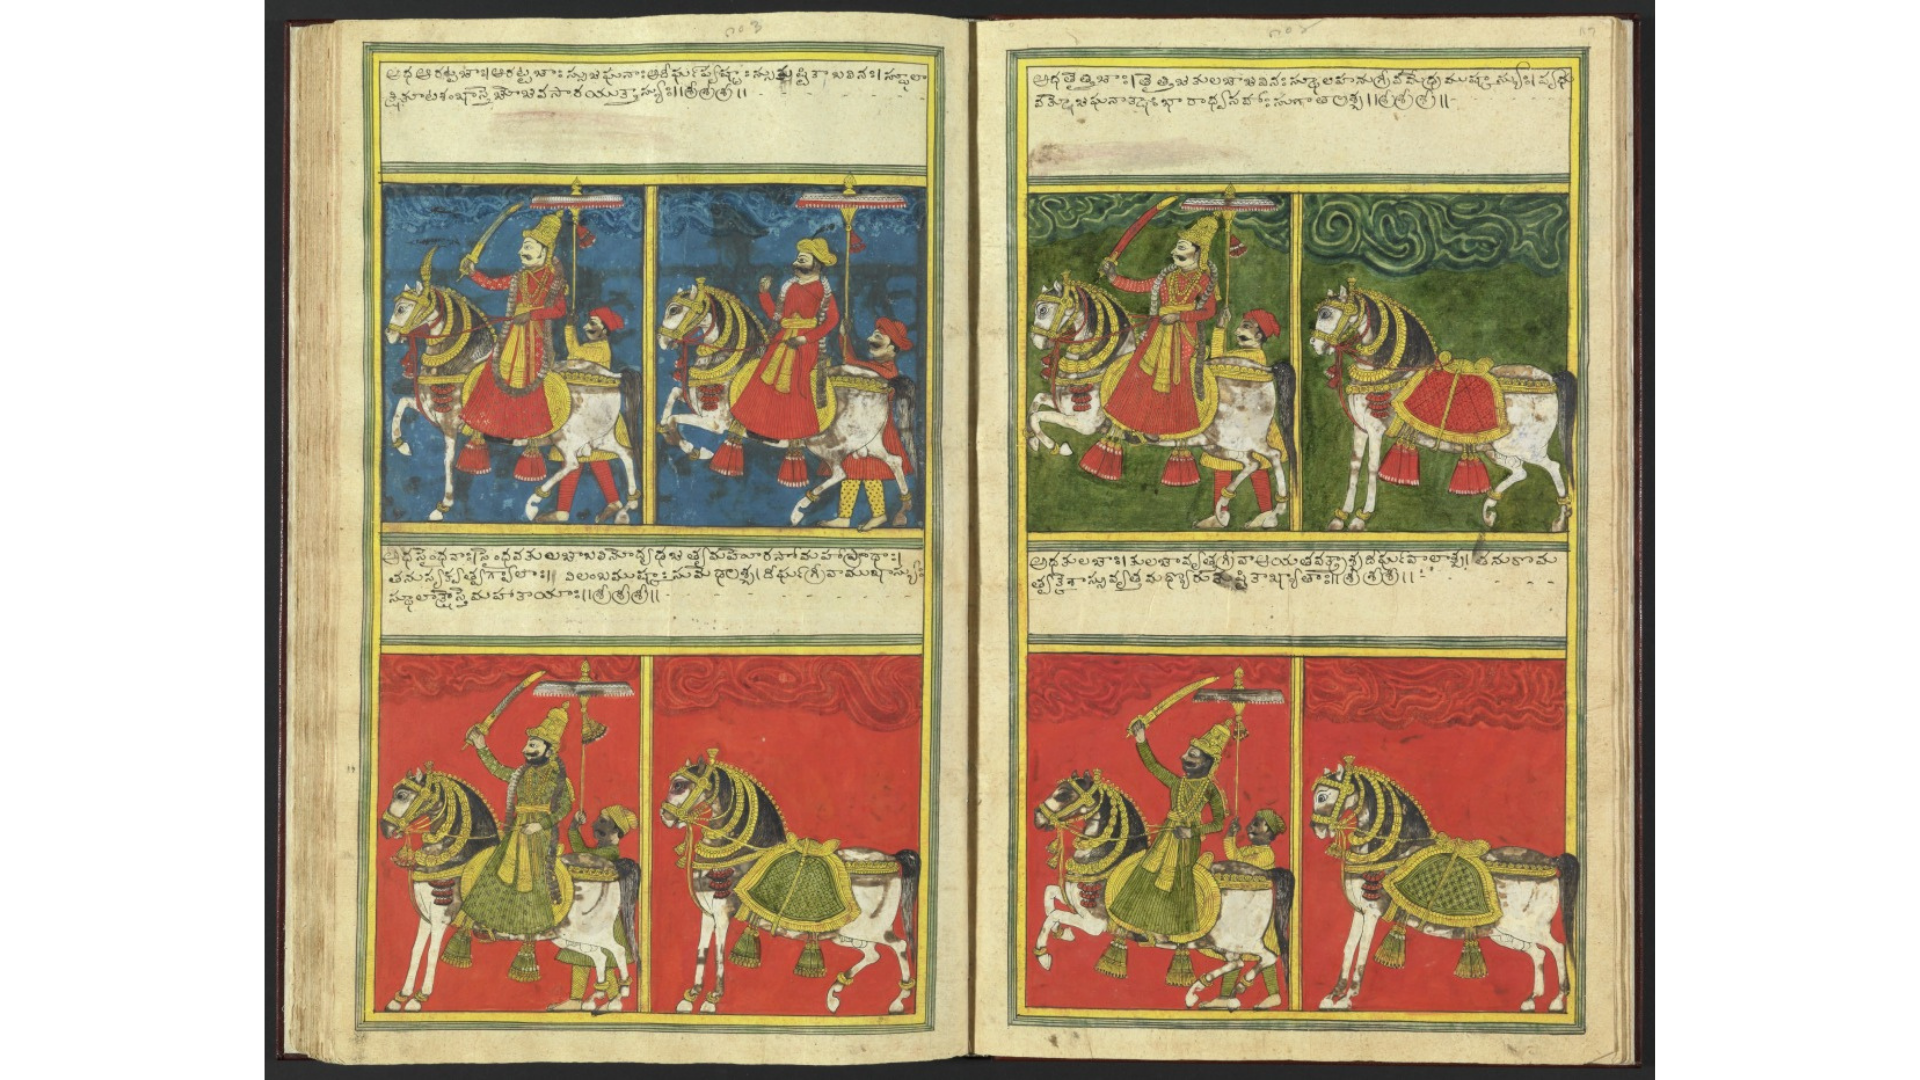 One of the pages from the manuscript of the Shalihotra